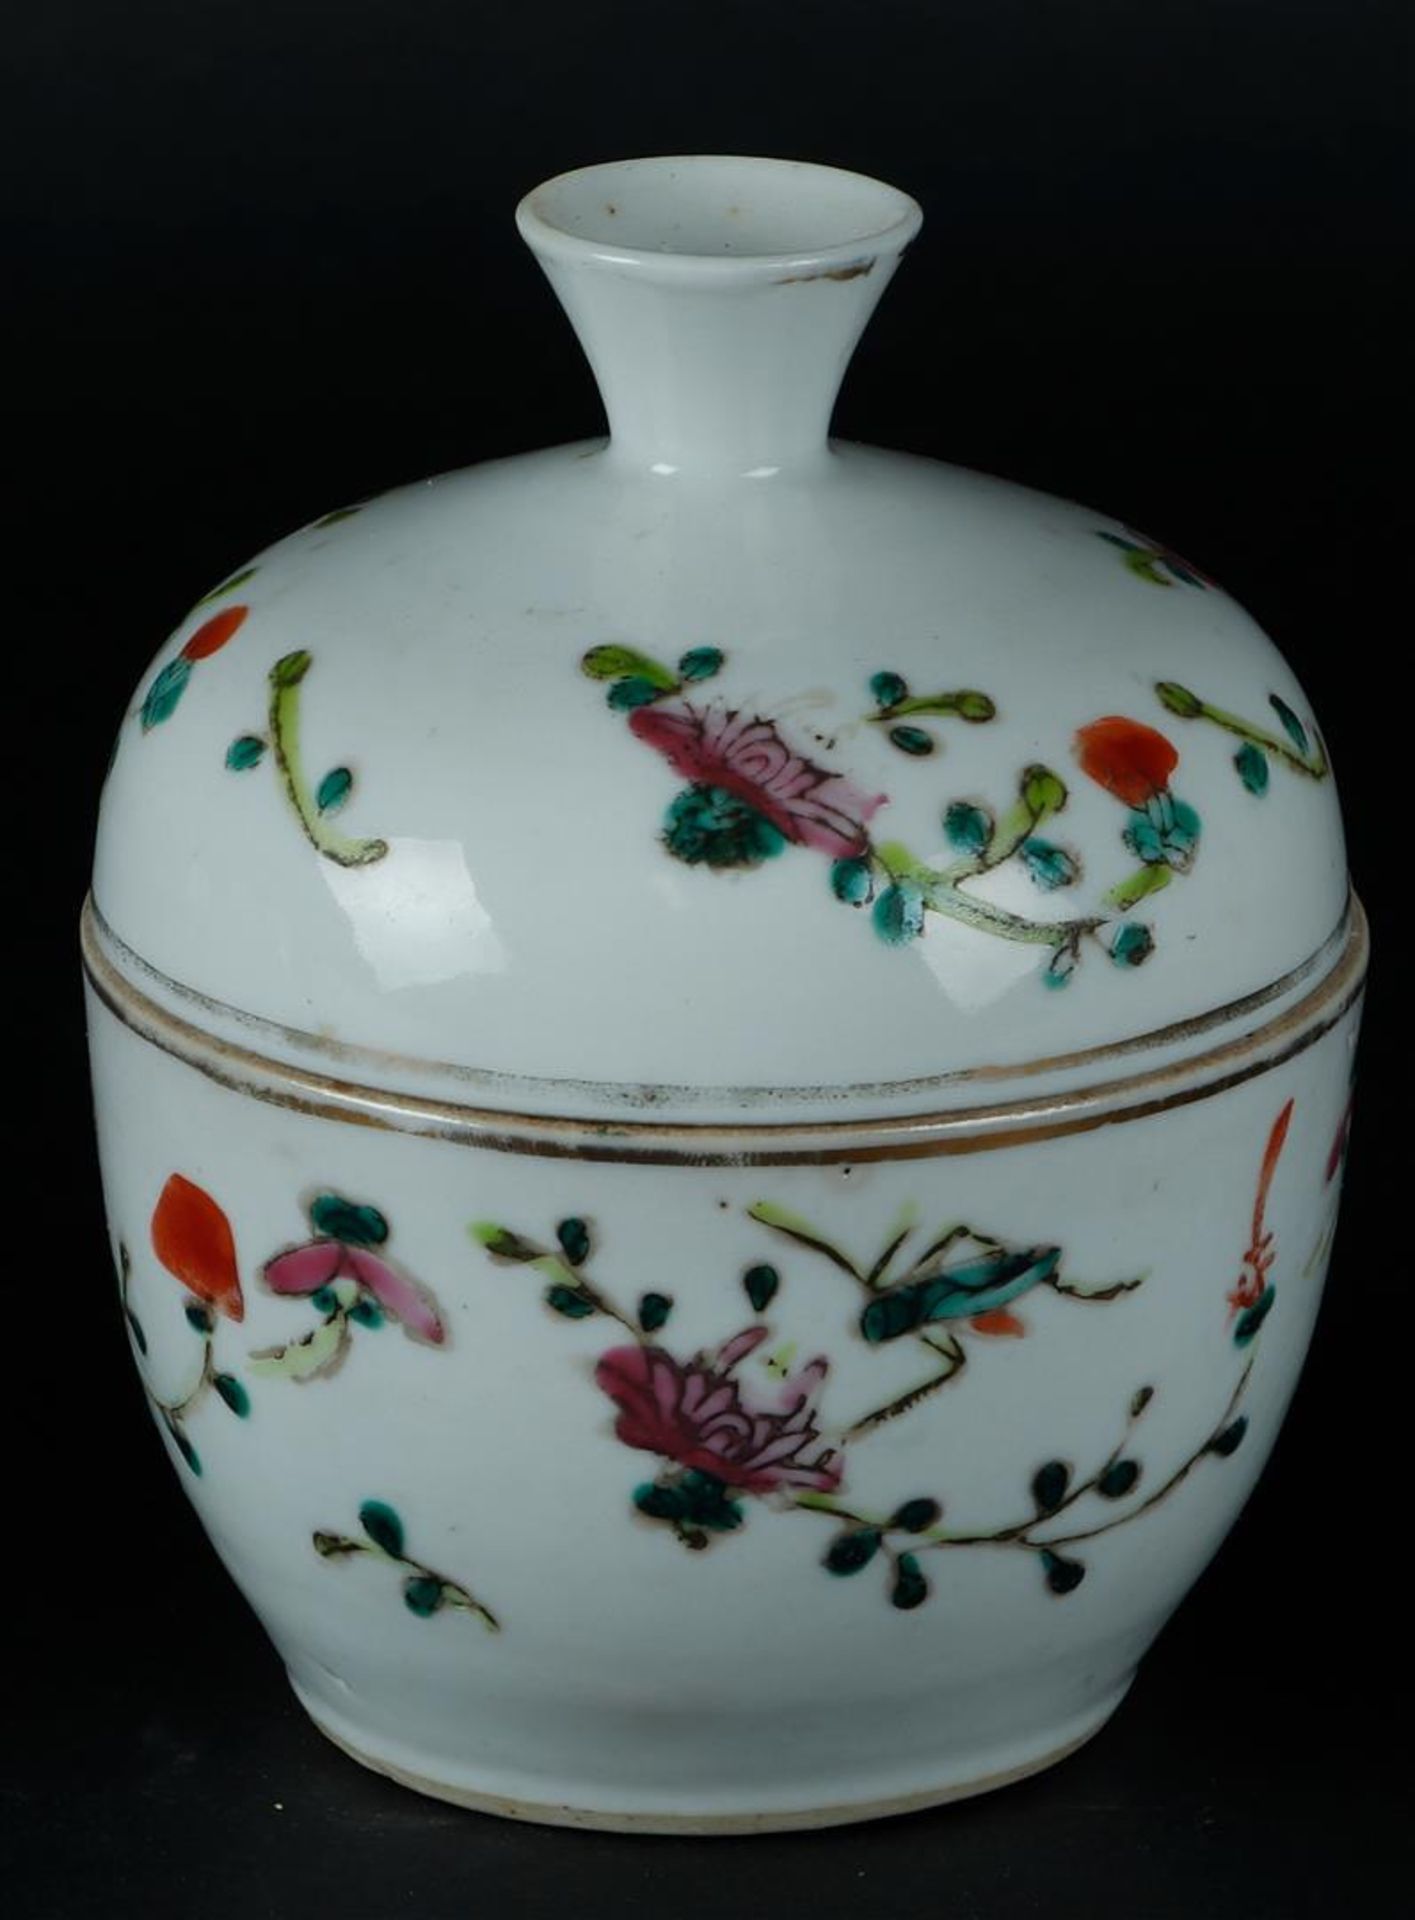 A porcelain Famille Rose lidded bowl. China, 19th century. - Image 2 of 4